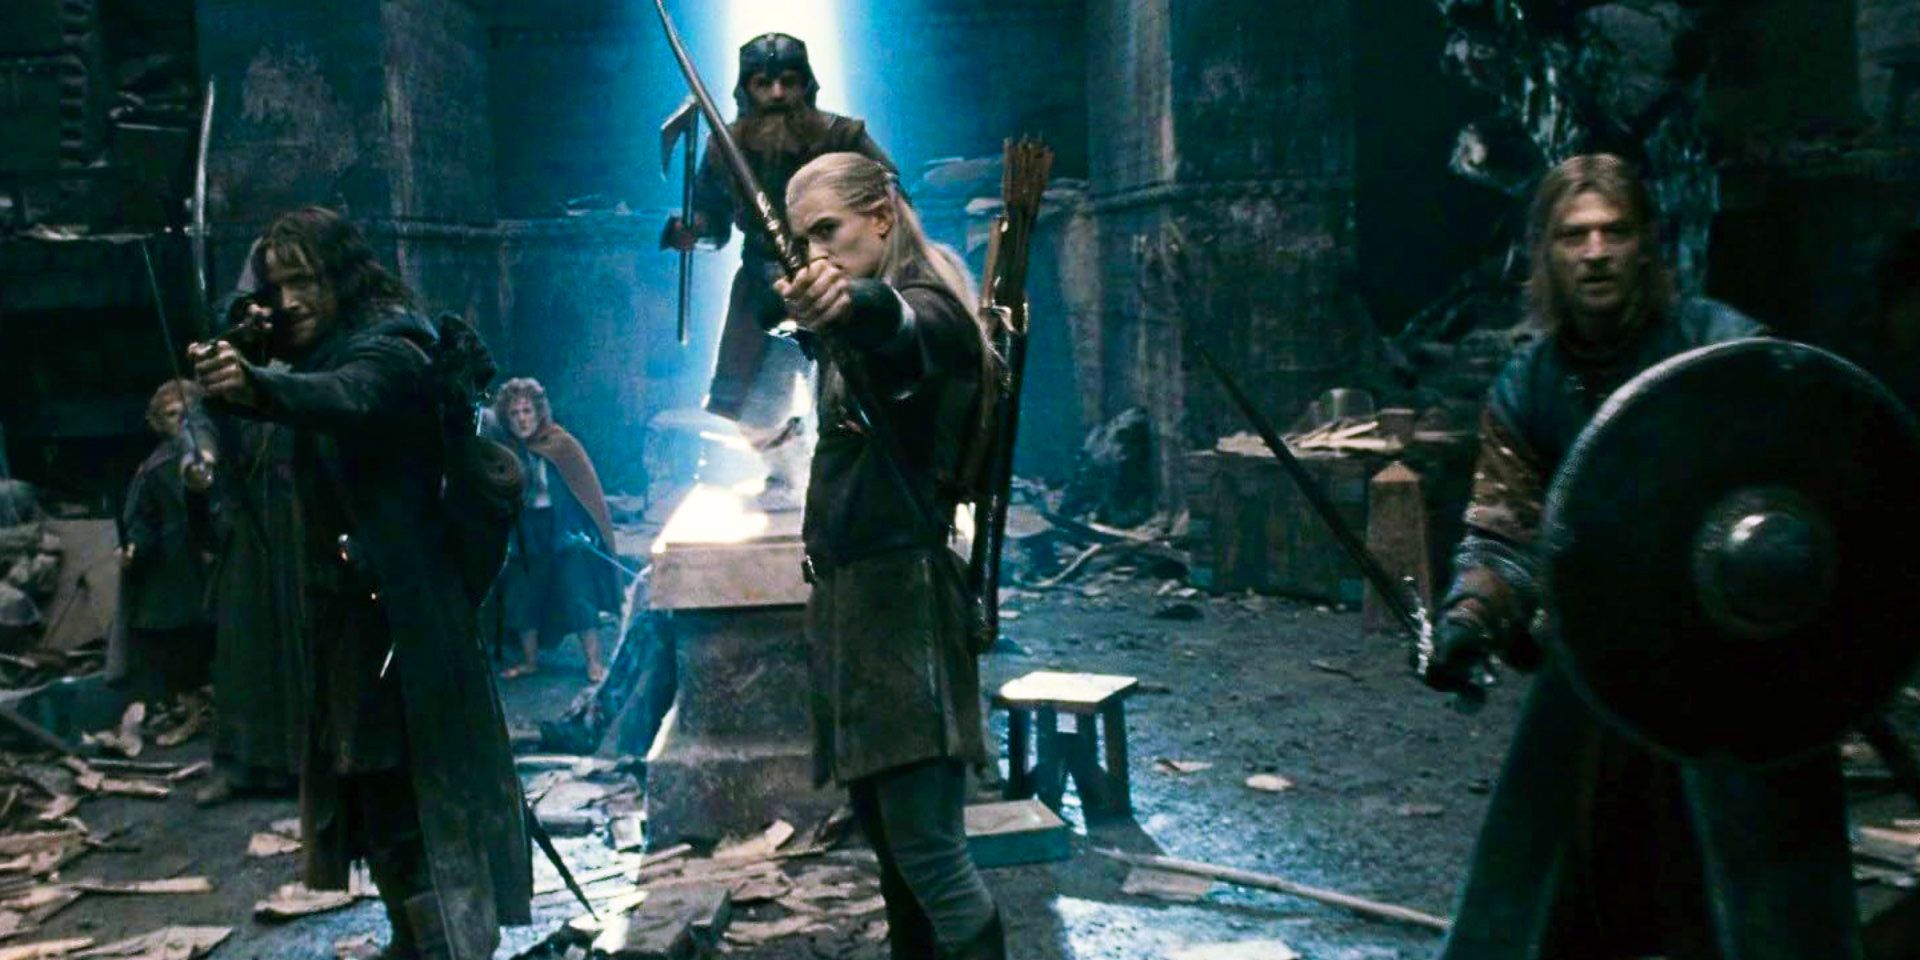 The Fellowship prepare for battle in the Mines of Moria in The Lord of the Rings